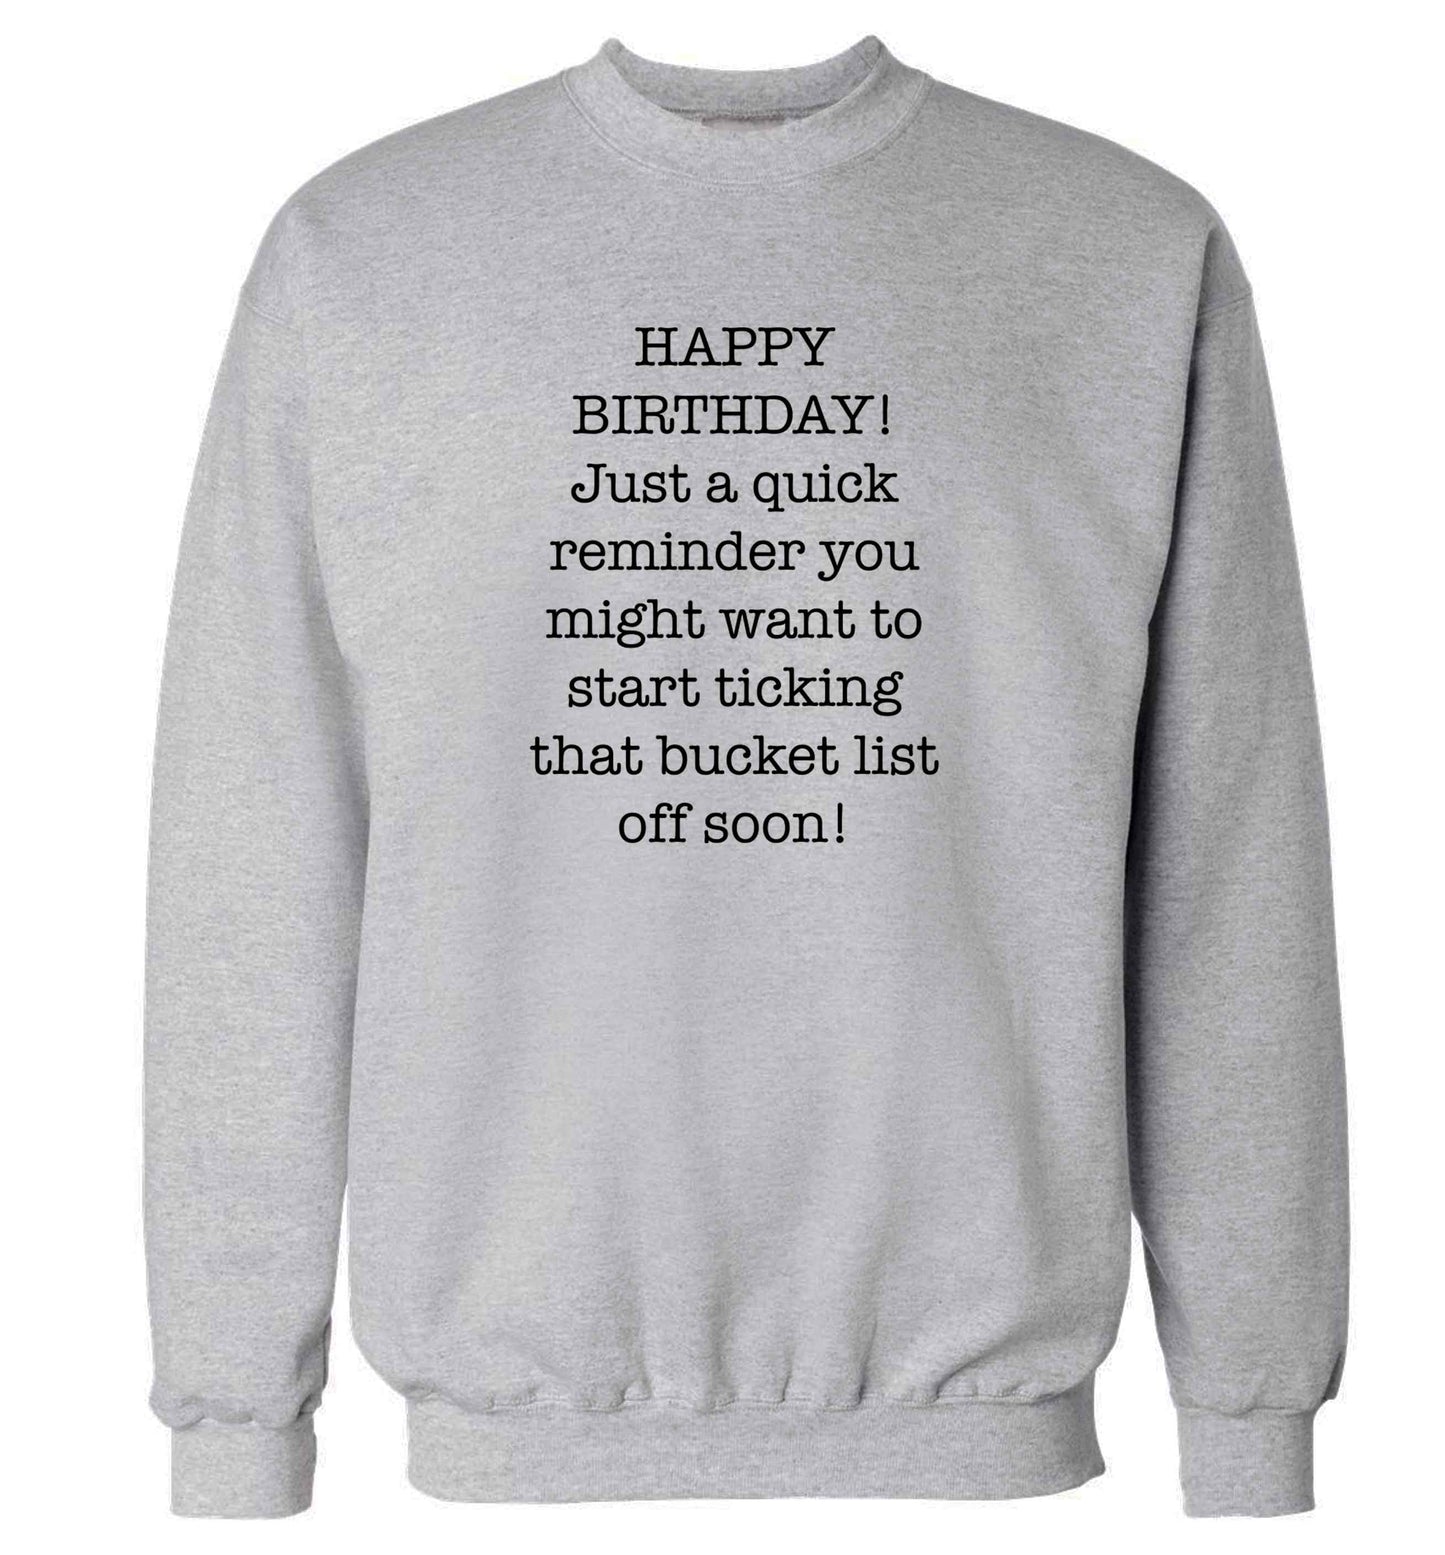 Happy birthday, just a quick reminder you might want to start ticking that bucket list off soon adult's unisex grey sweater 2XL